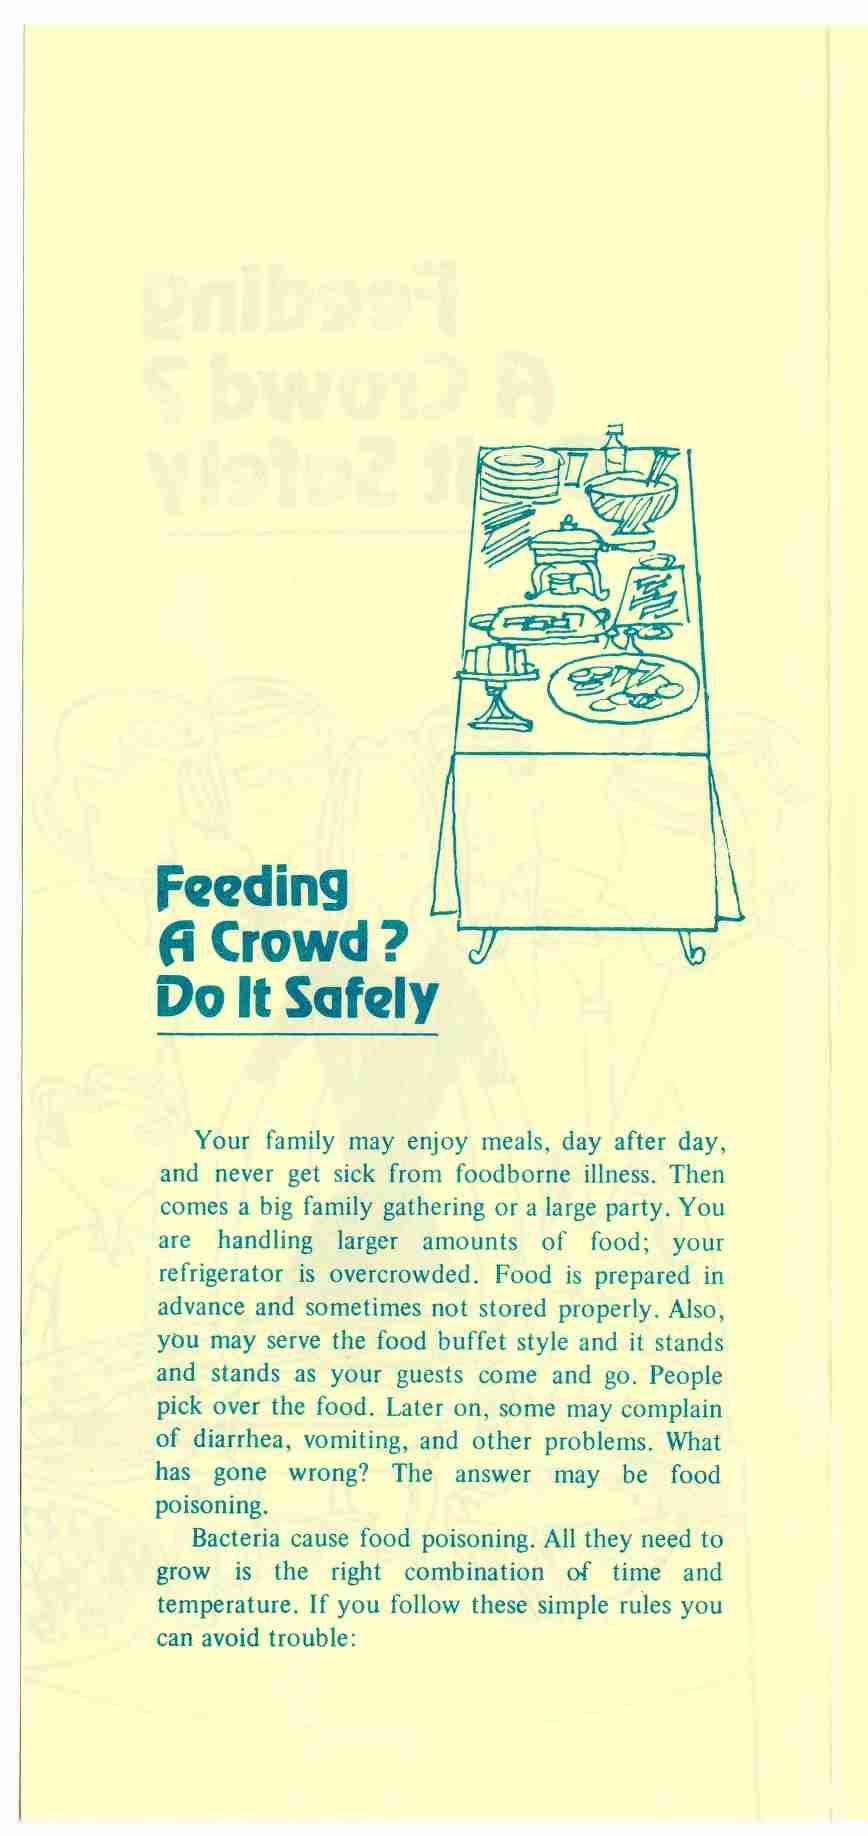 Feeding 6i Crowd? 'J/ E Do It Safely Your family may enjoy meals, day after day, and never get sick from foodborne illness. Then comes a big family gathering or a large party.